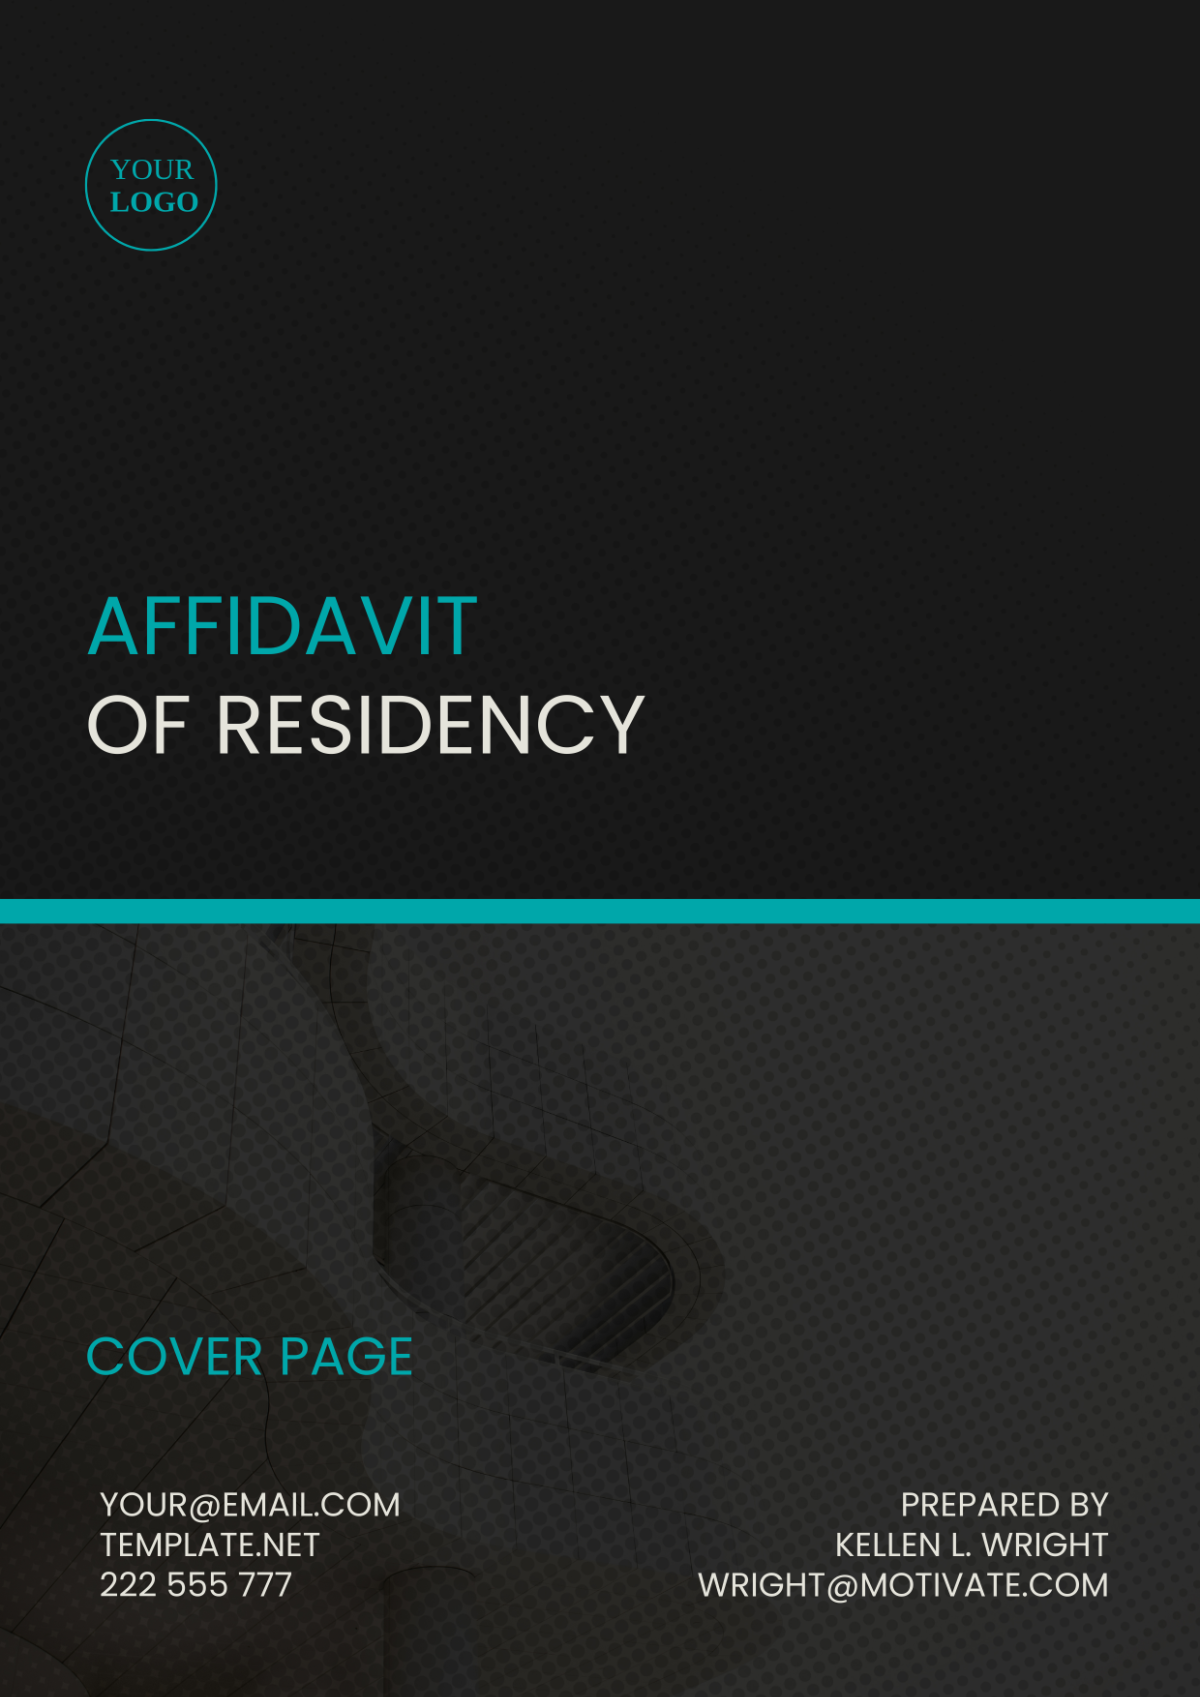 Affidavit of Residency Cover Page